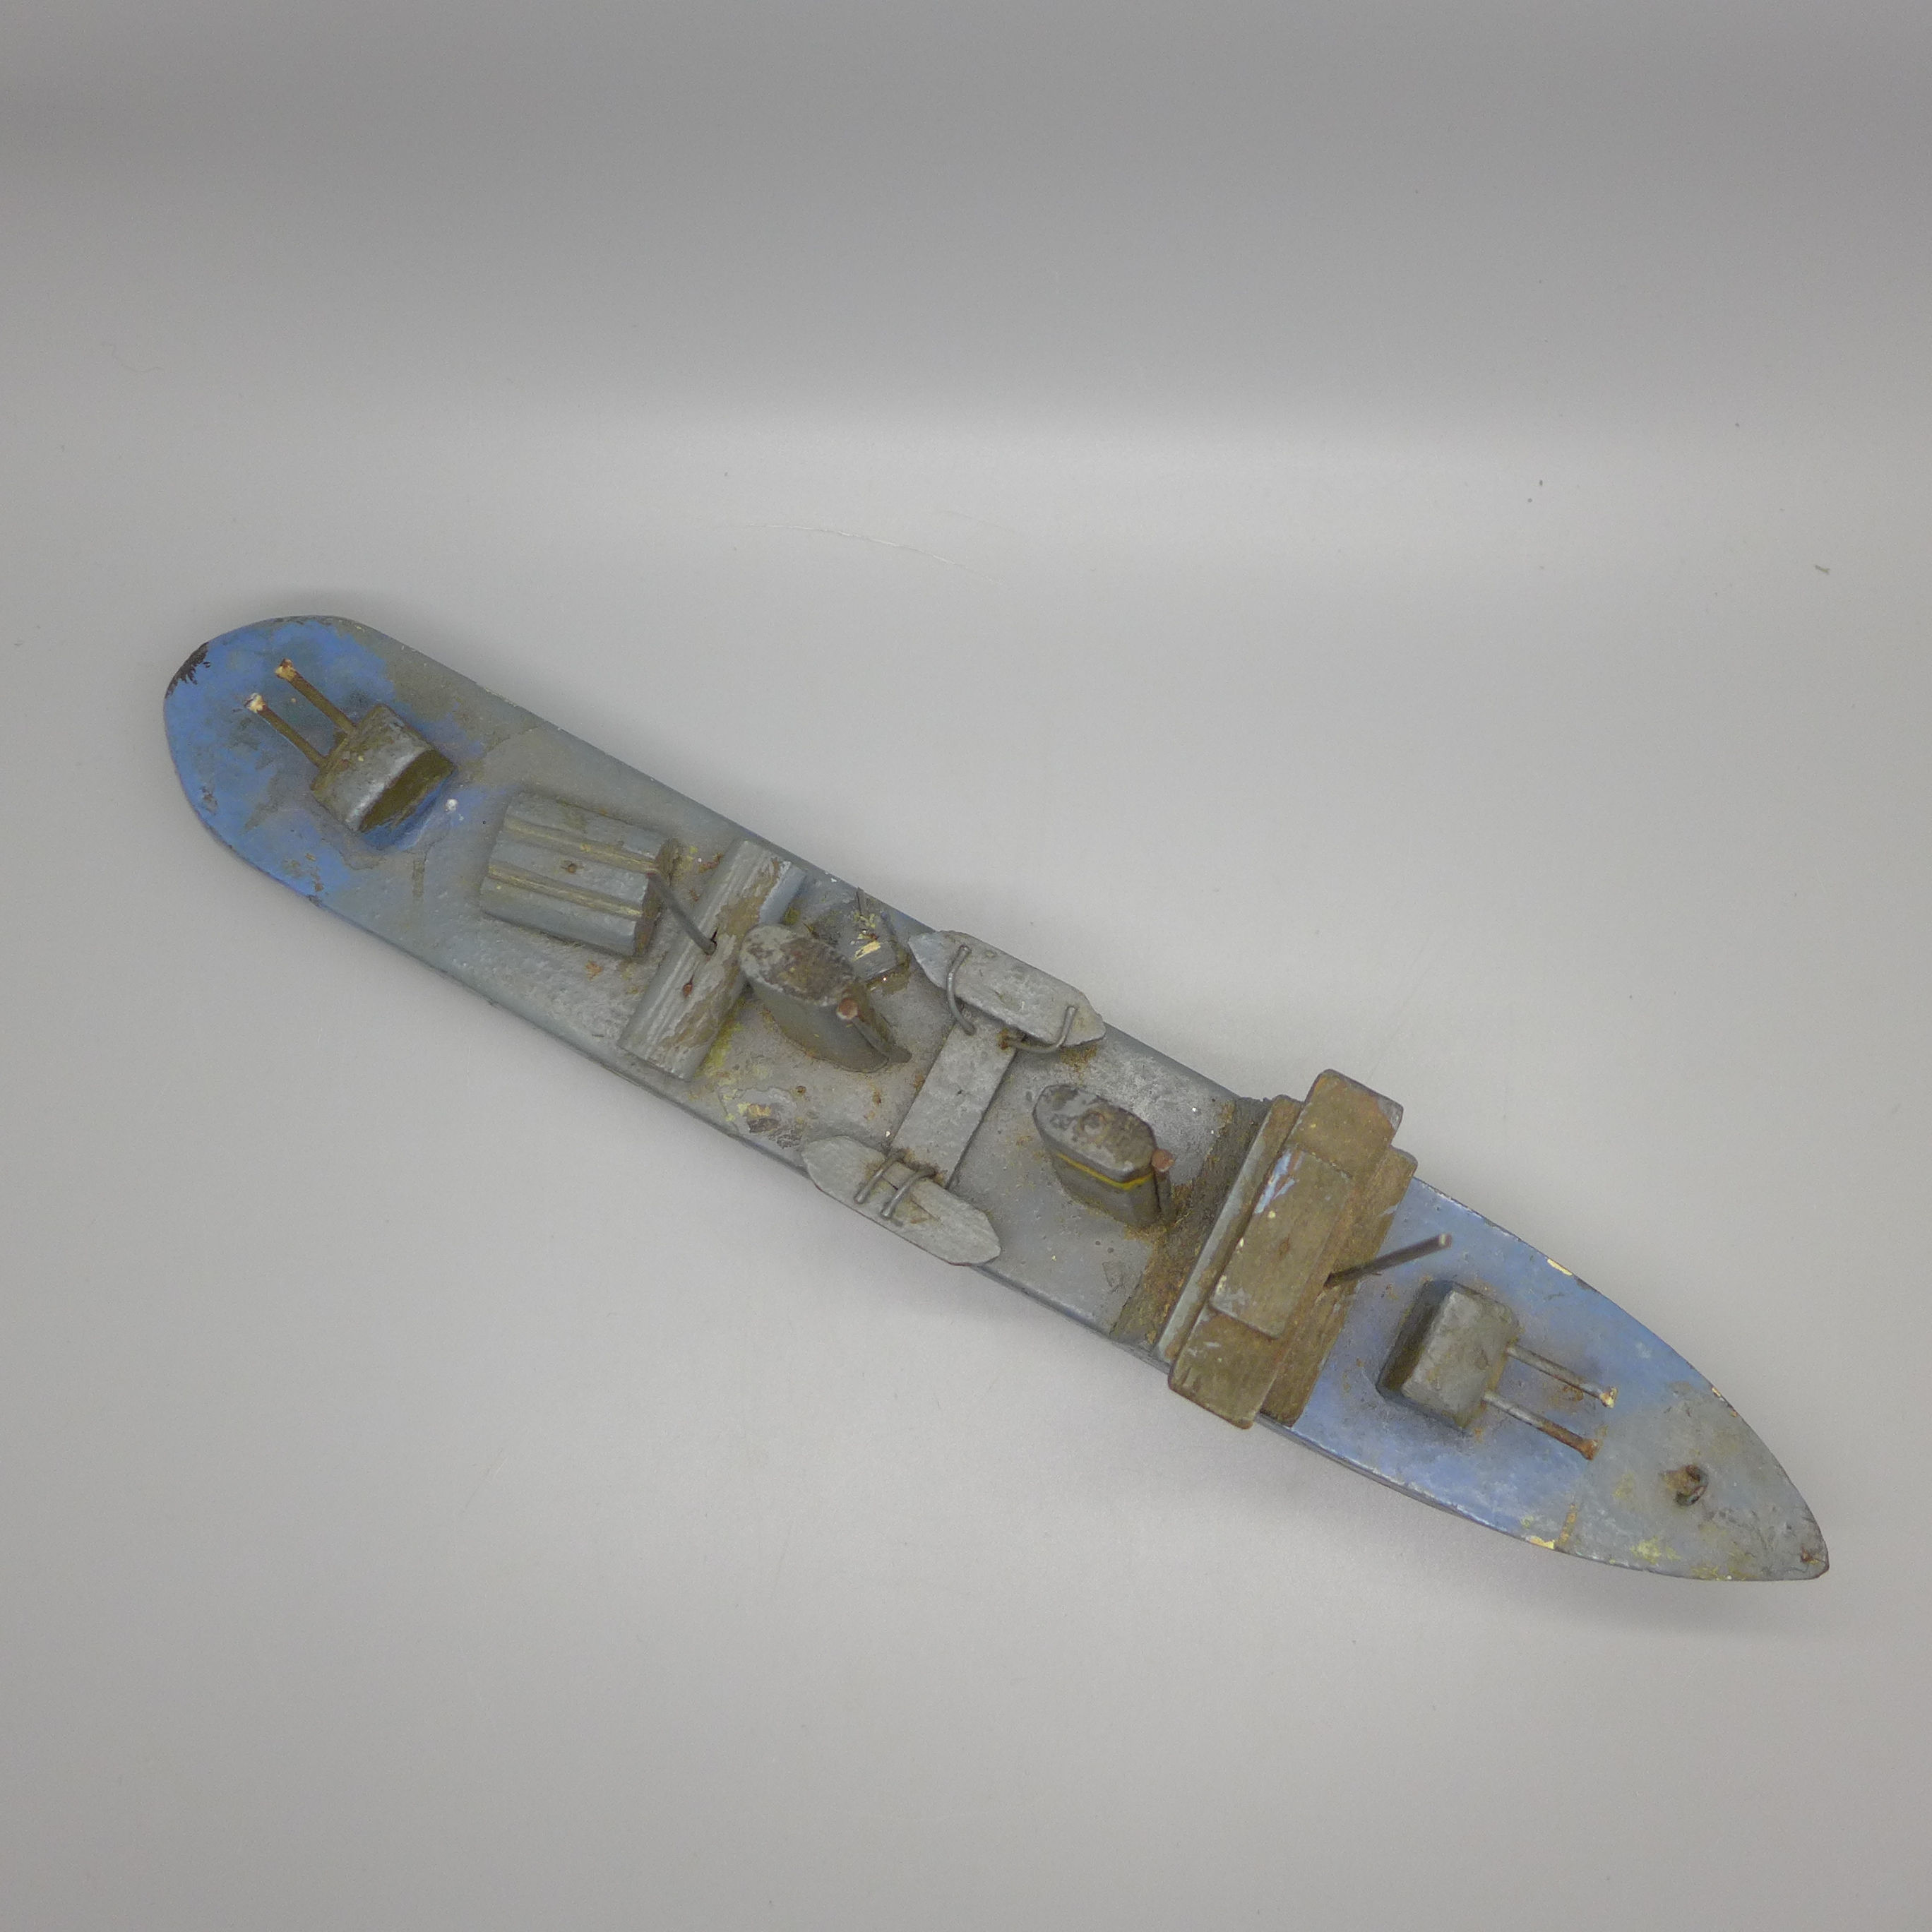 A wooden model of a WWII Royal Navy ship, 30cm - Image 2 of 2